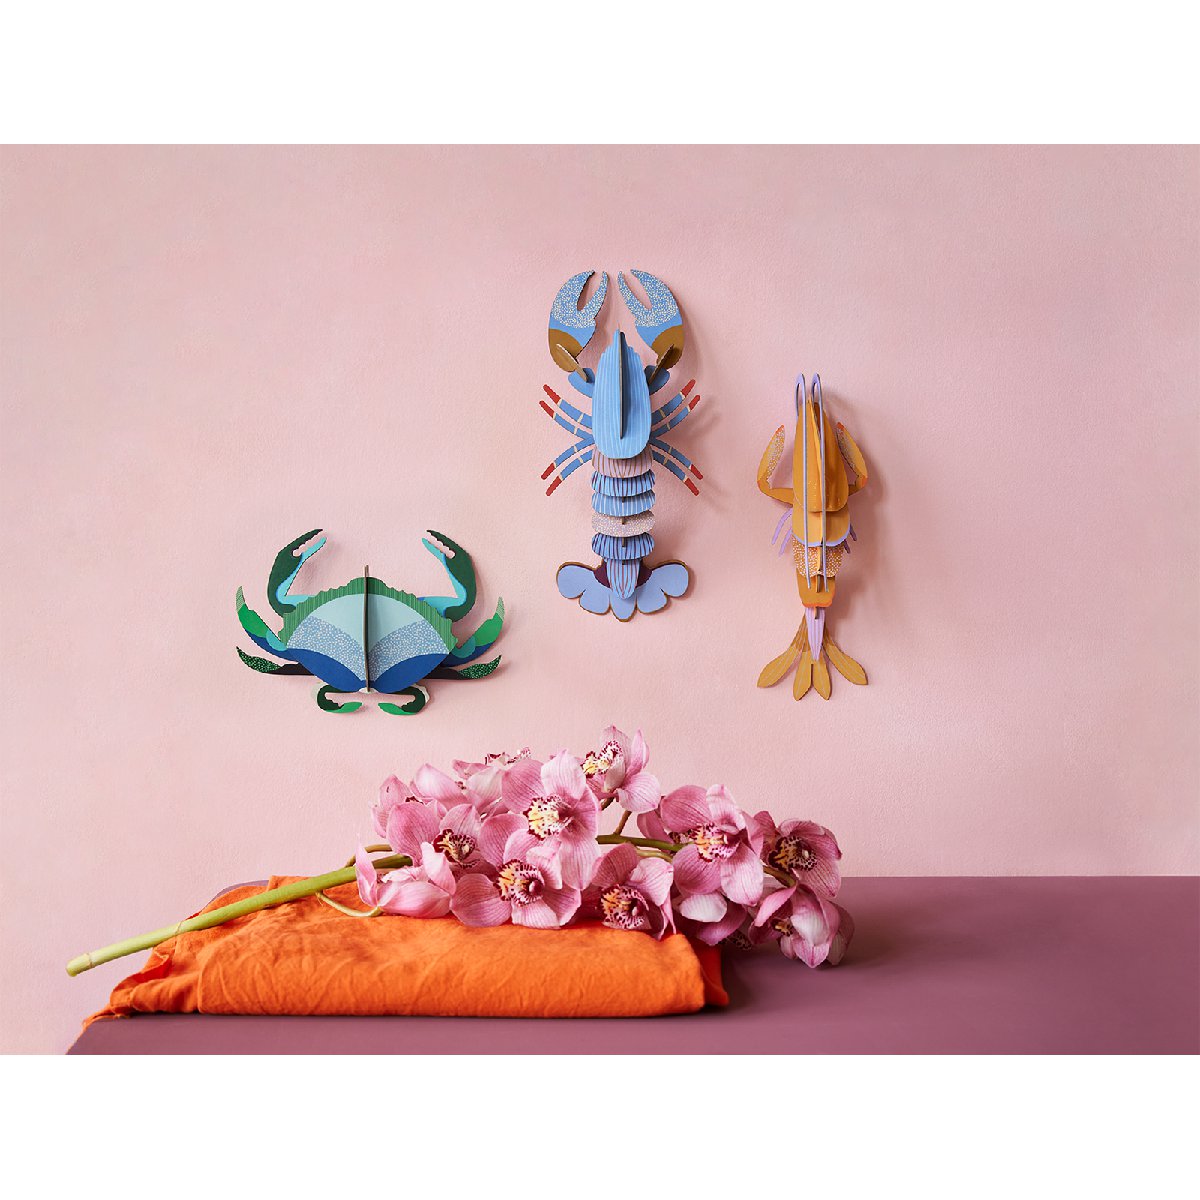 mondocherry - Studio Roof | lavender lobster wall decor - collection